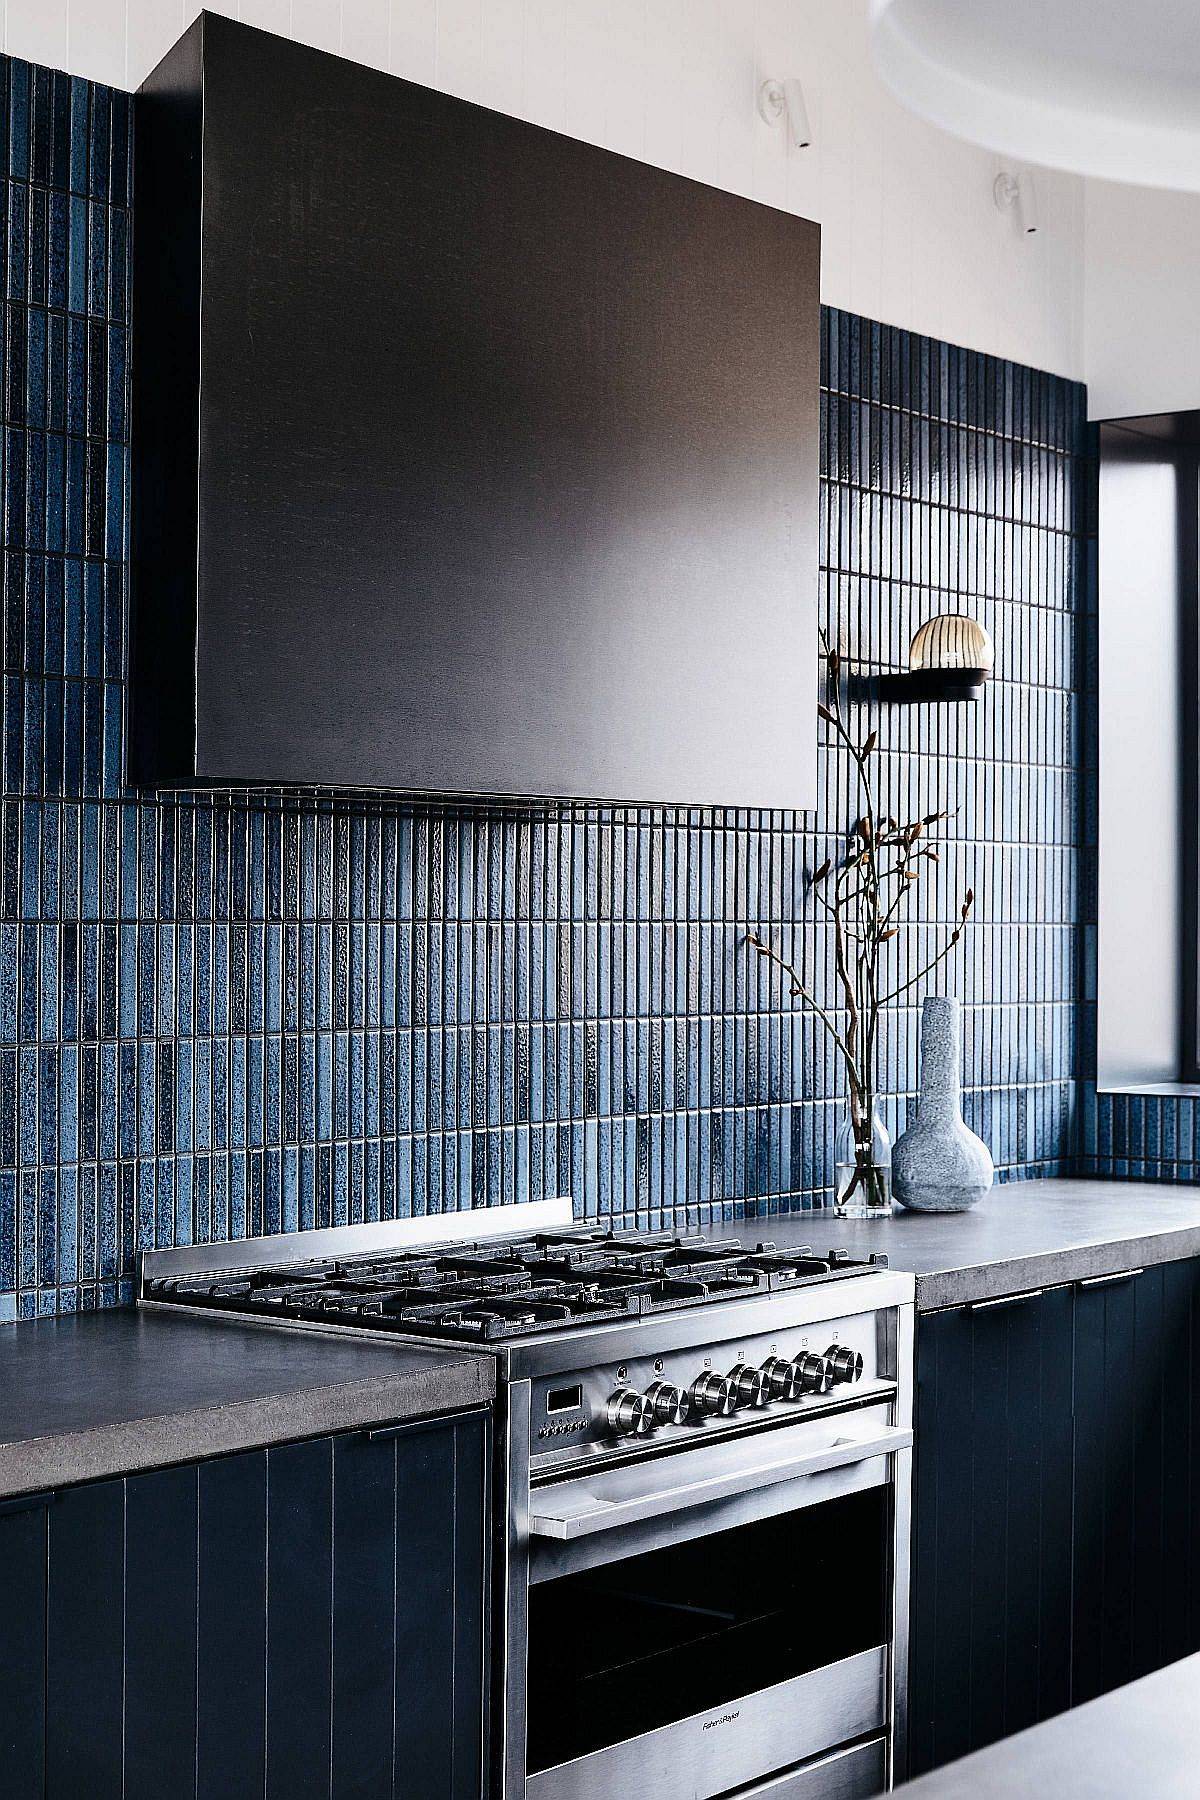 Different shades of blue brought in by the vertical tile backsplash make a big visual impact